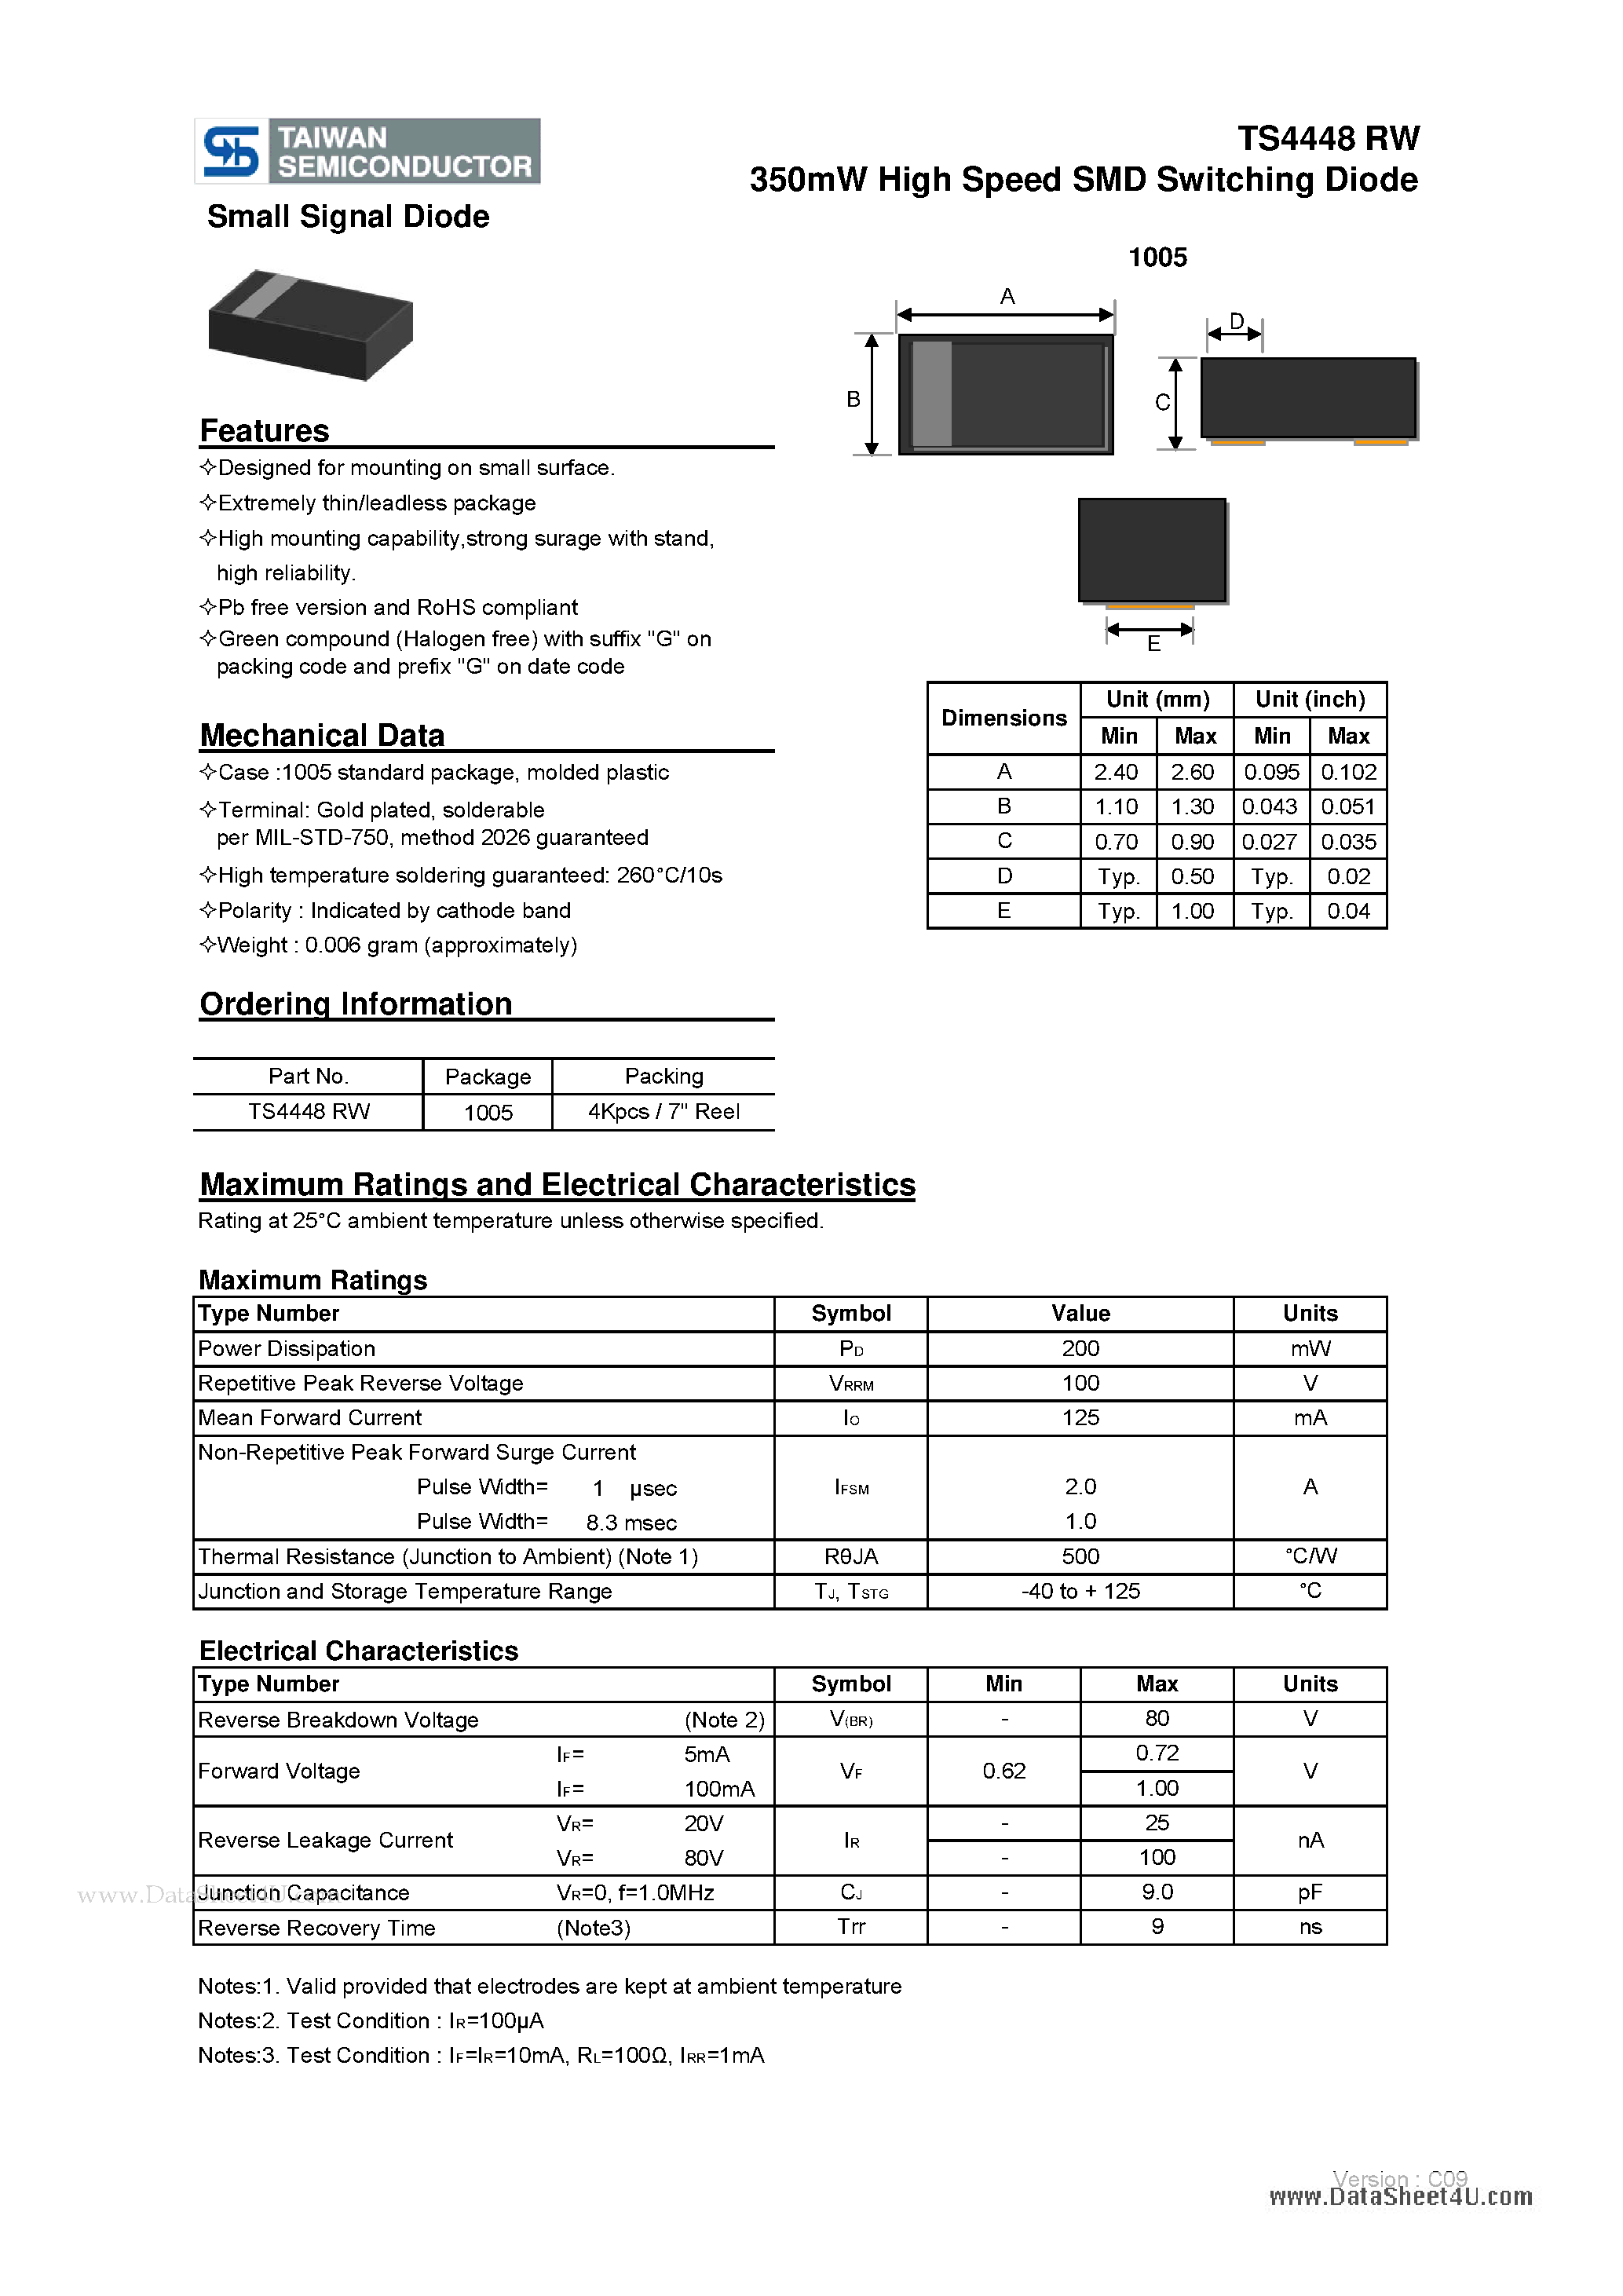 Datasheet TS4448RW - 350mW High Speed SMD Switching Diode page 1